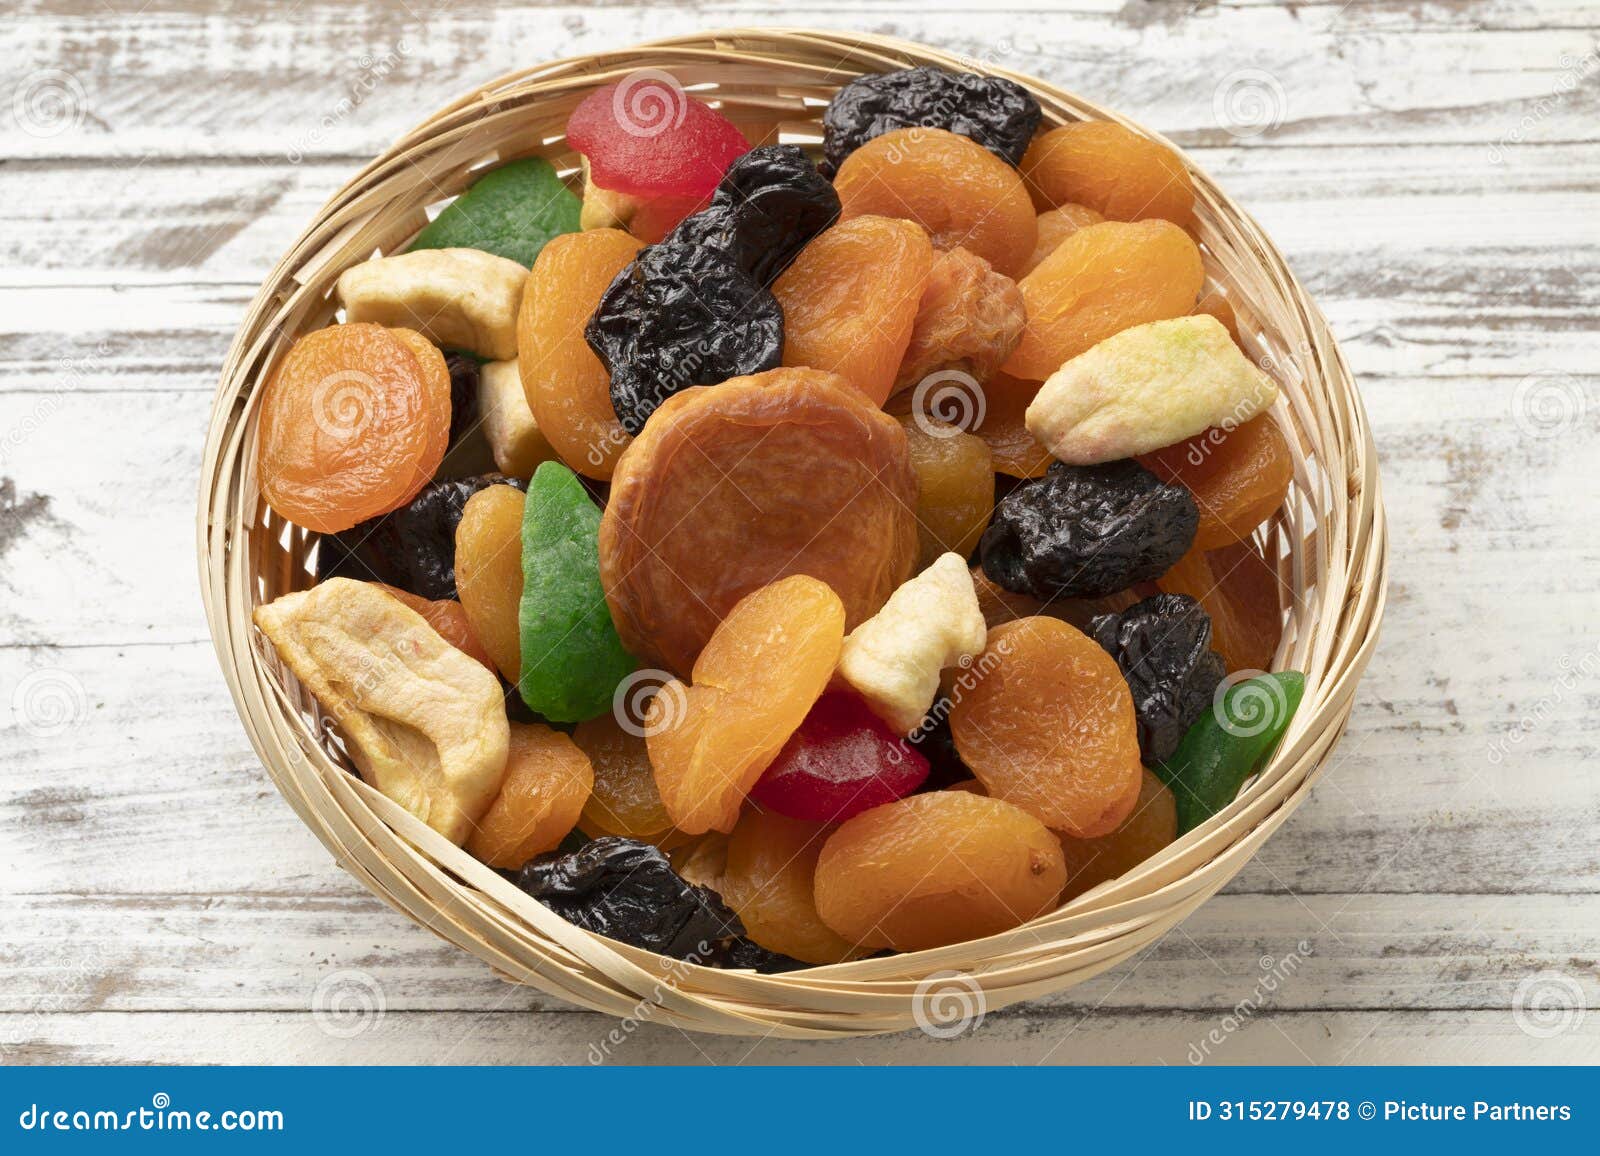 basket with dried fruit, tutti frutti, on wooden background